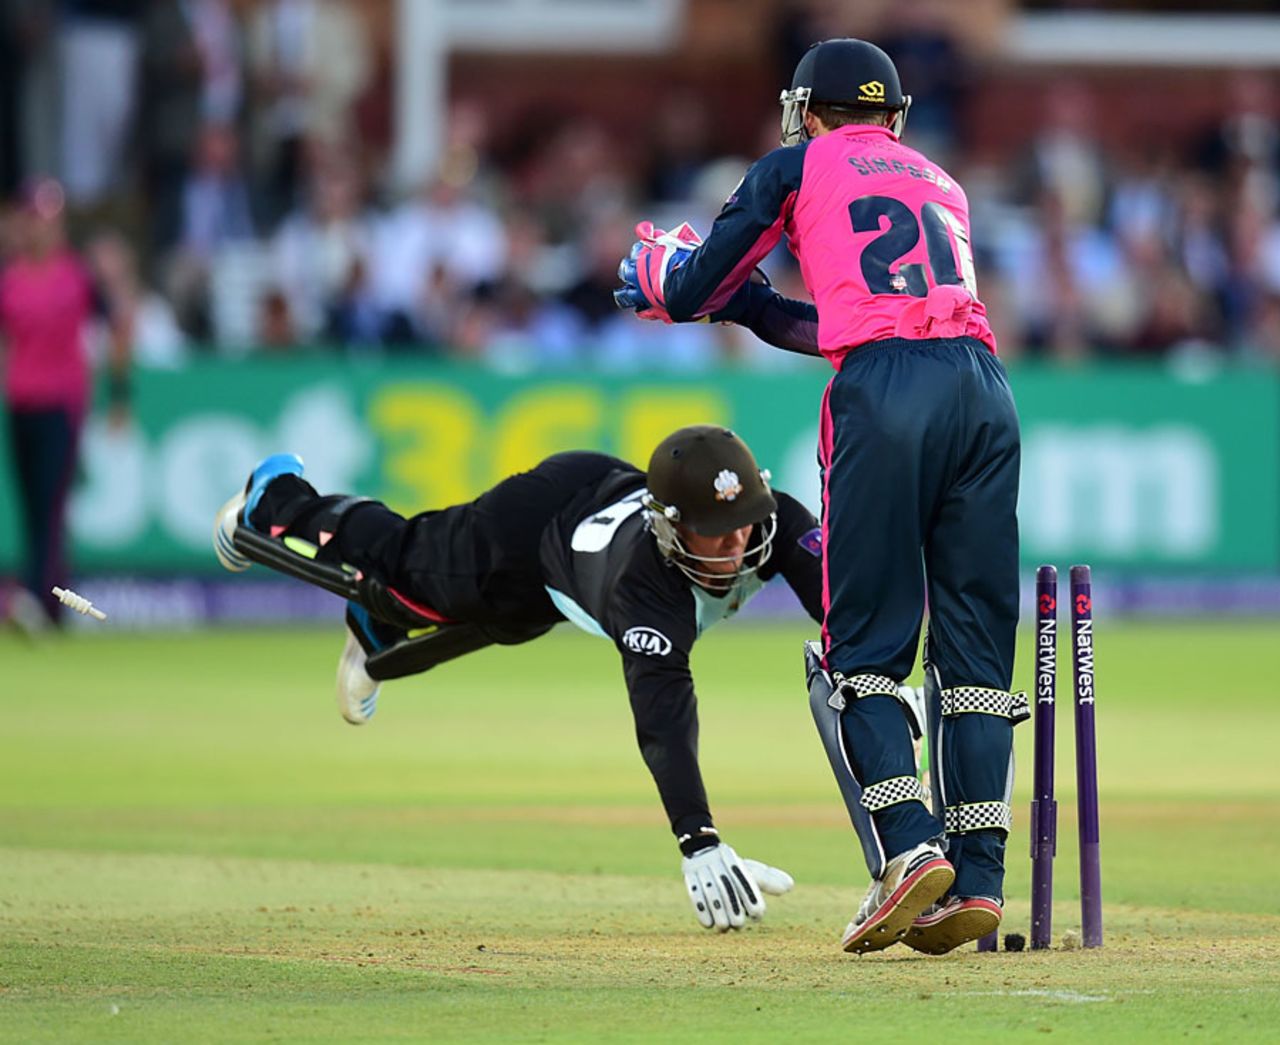 Jason Roy could not regain his ground, Middlesex v Surrey, NatWest Blast T20, Lord's, July 24, 2014